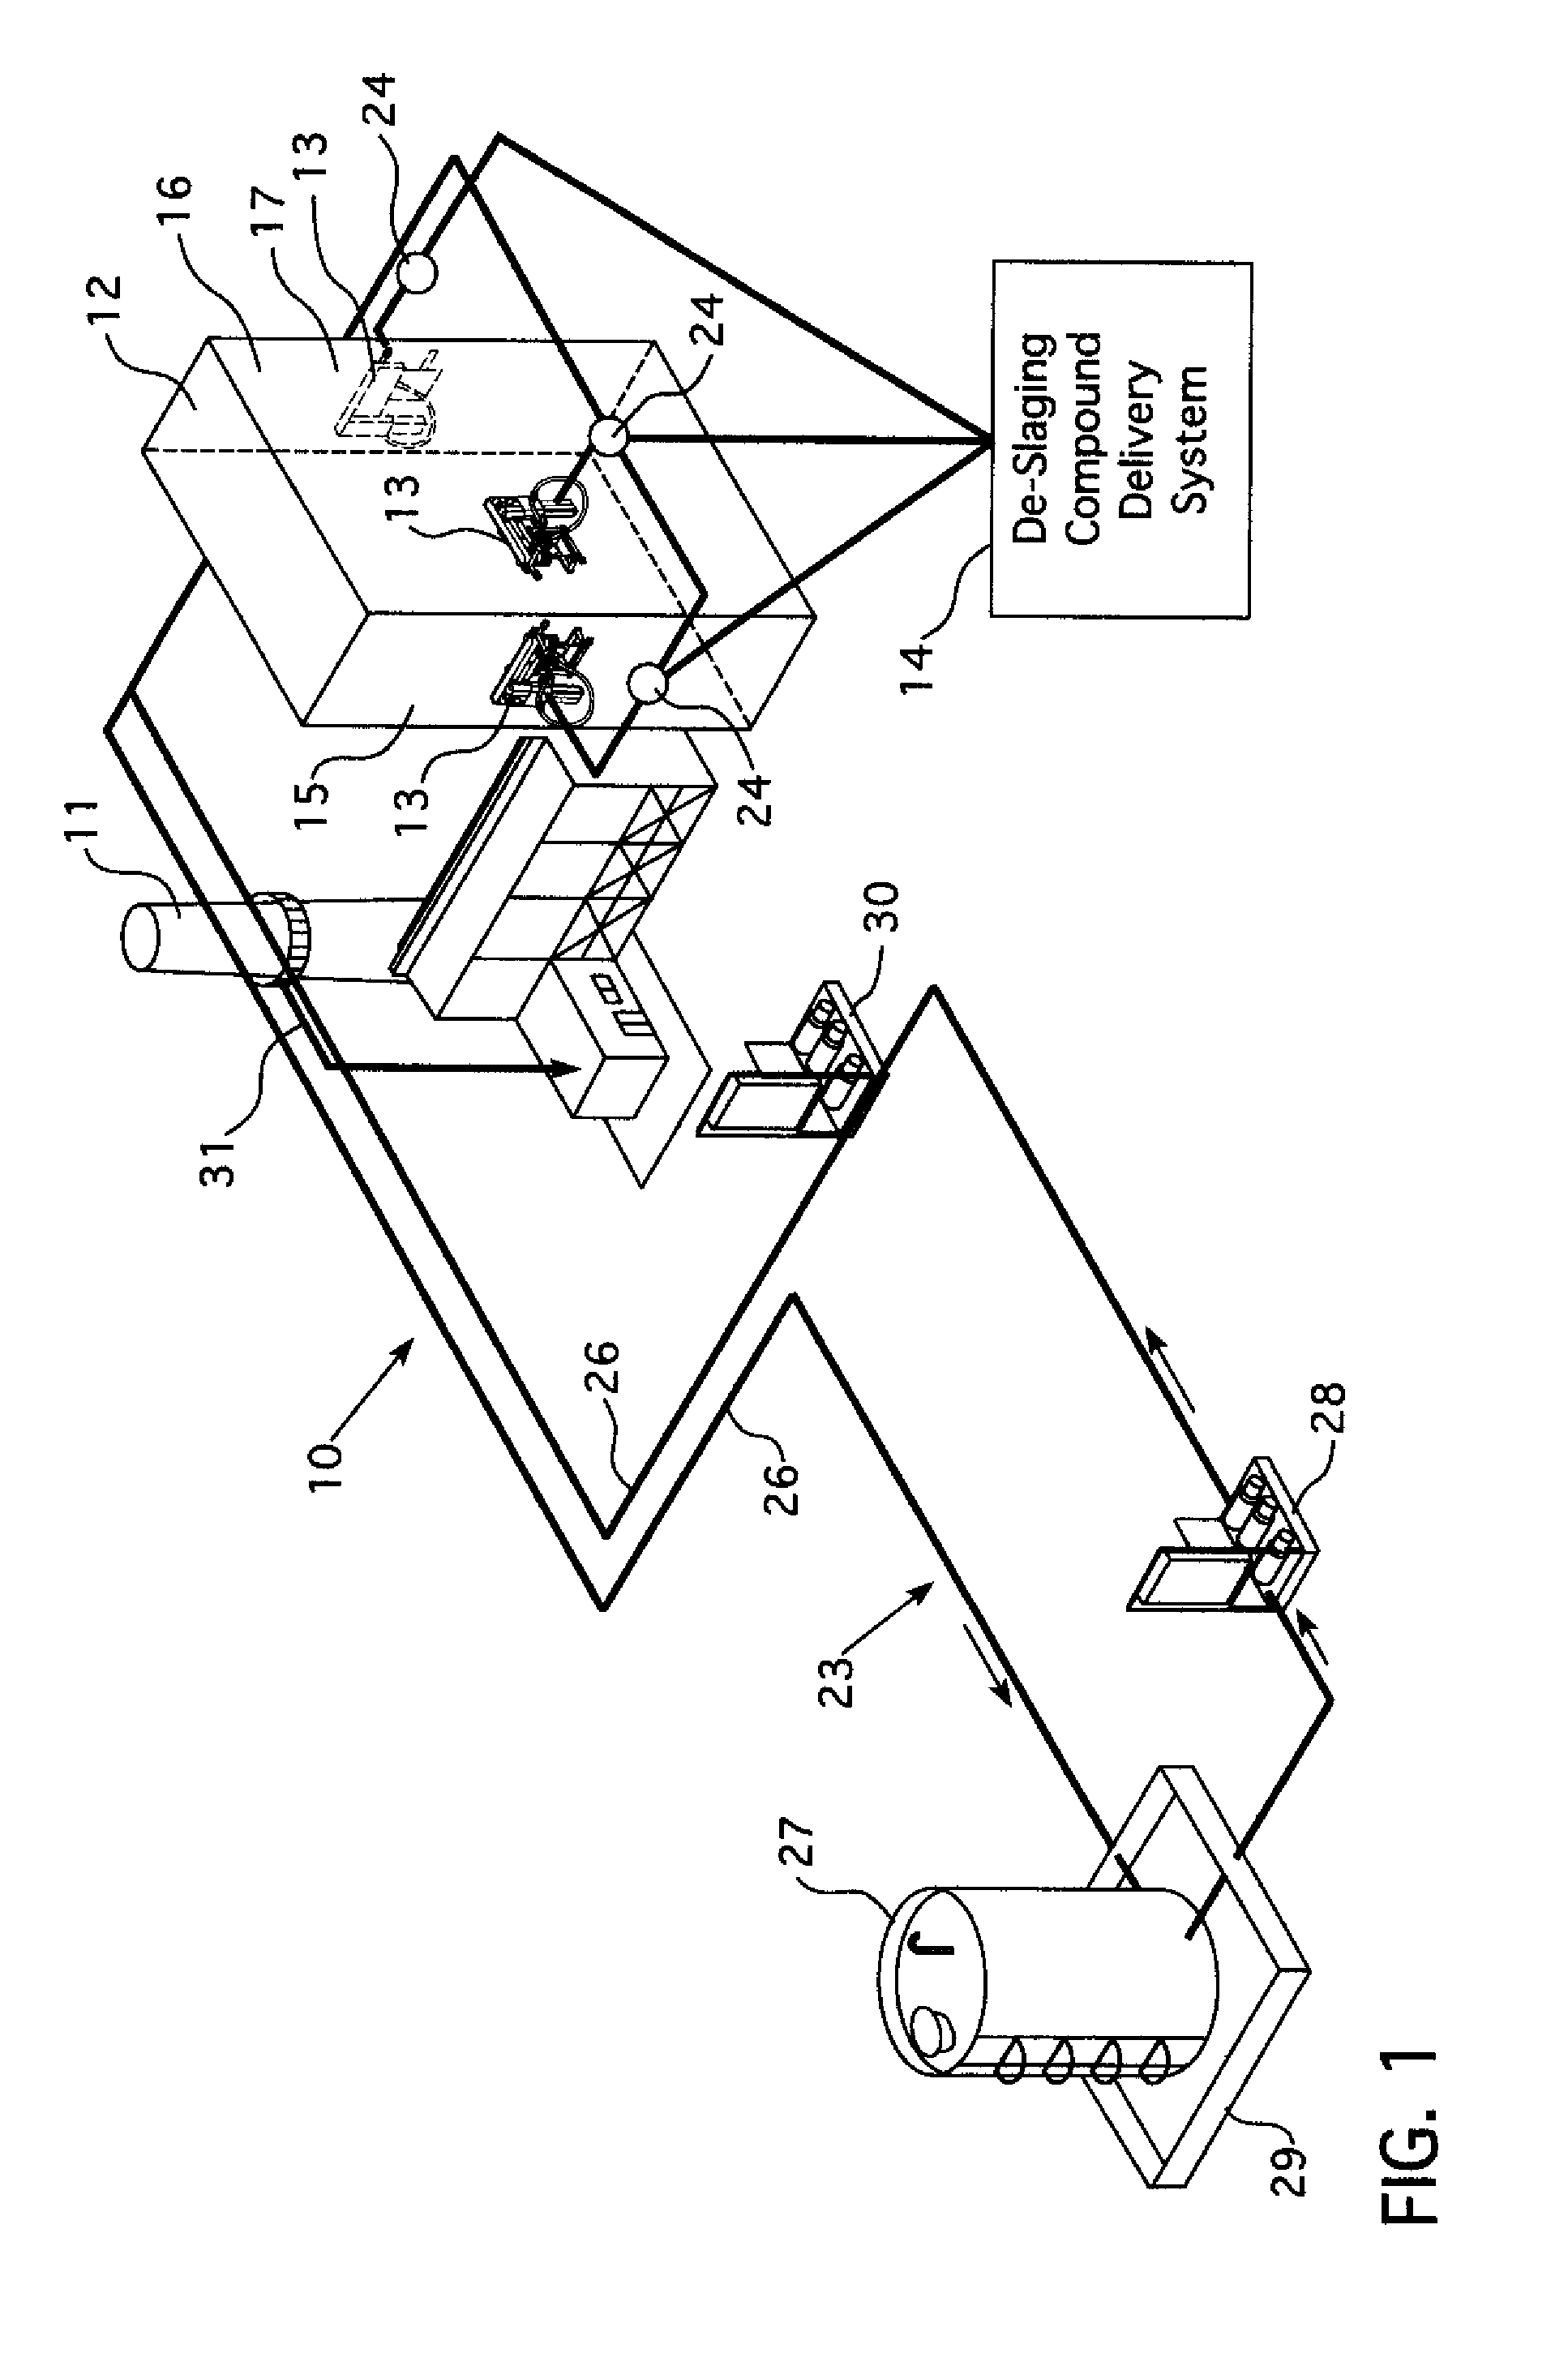 Method and apparatus for reduction of pollutants in combustion effluent